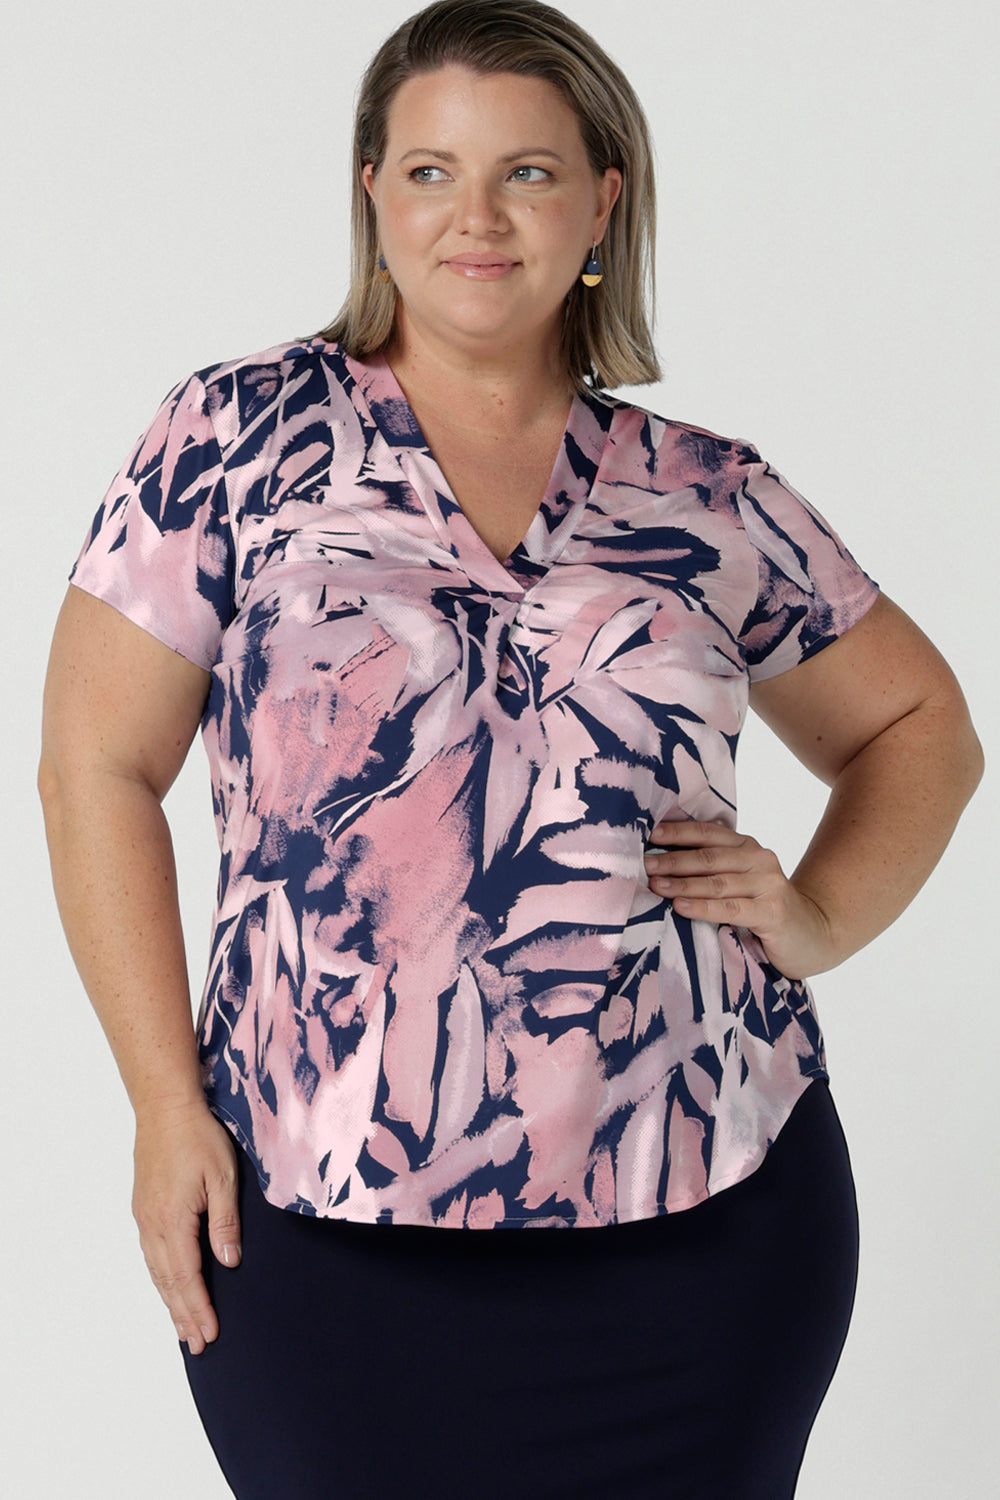 Size 18 woman wears a Emily top in Cantata with a navy base and pink brush strokes. V-neckline on a soft slinky jersey. Corporate casual top for women. Size 8 - 24